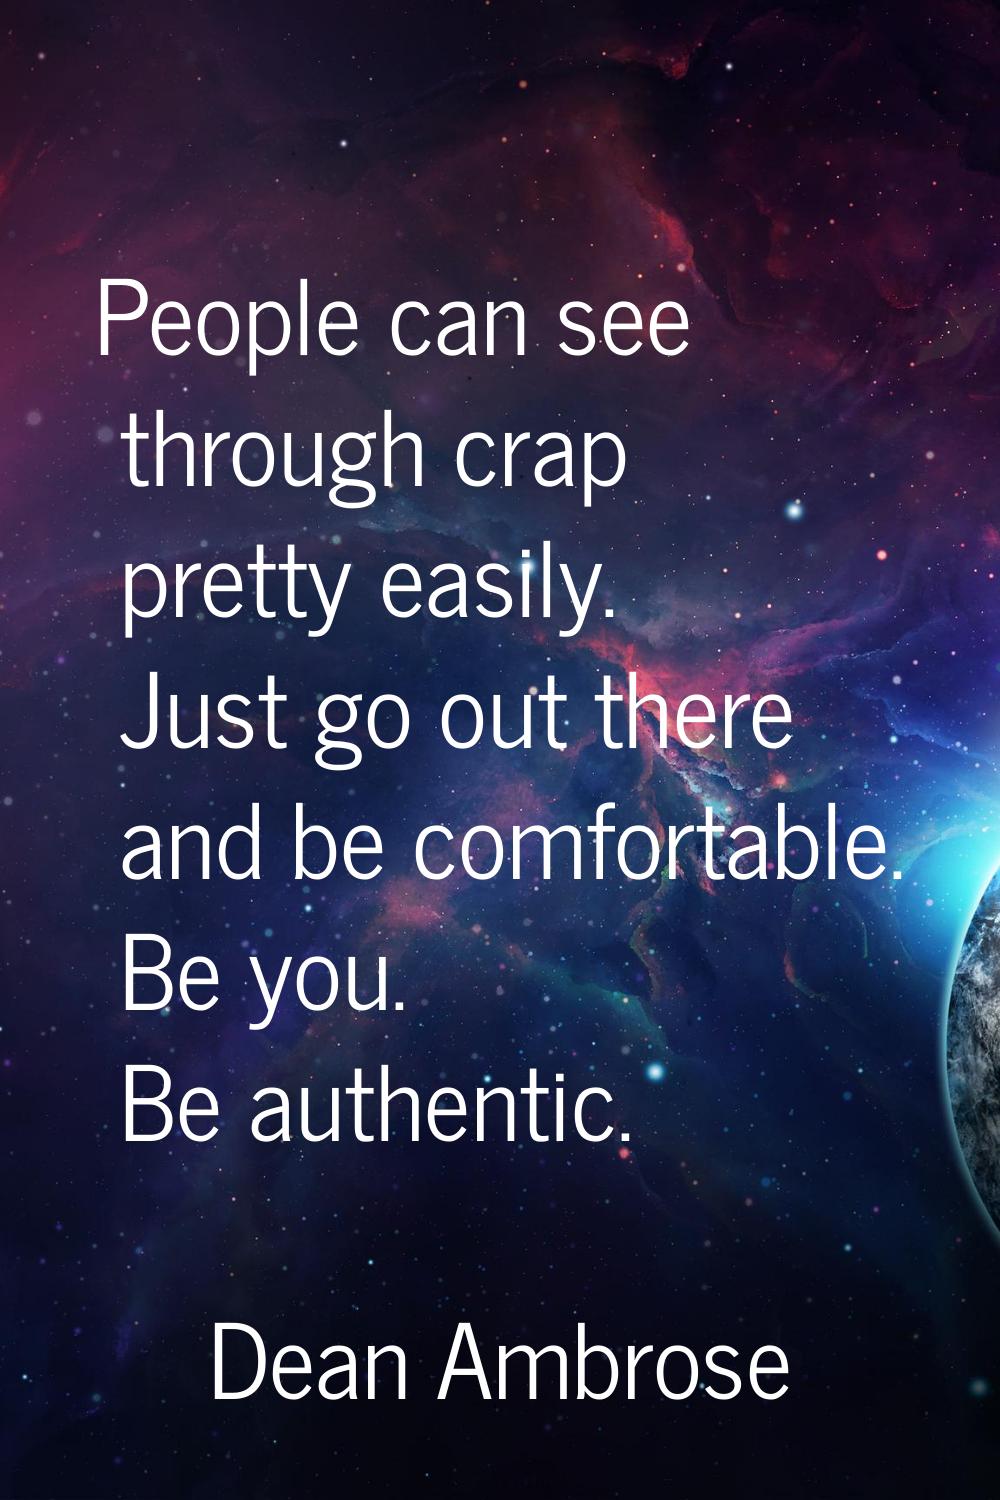 People can see through crap pretty easily. Just go out there and be comfortable. Be you. Be authent